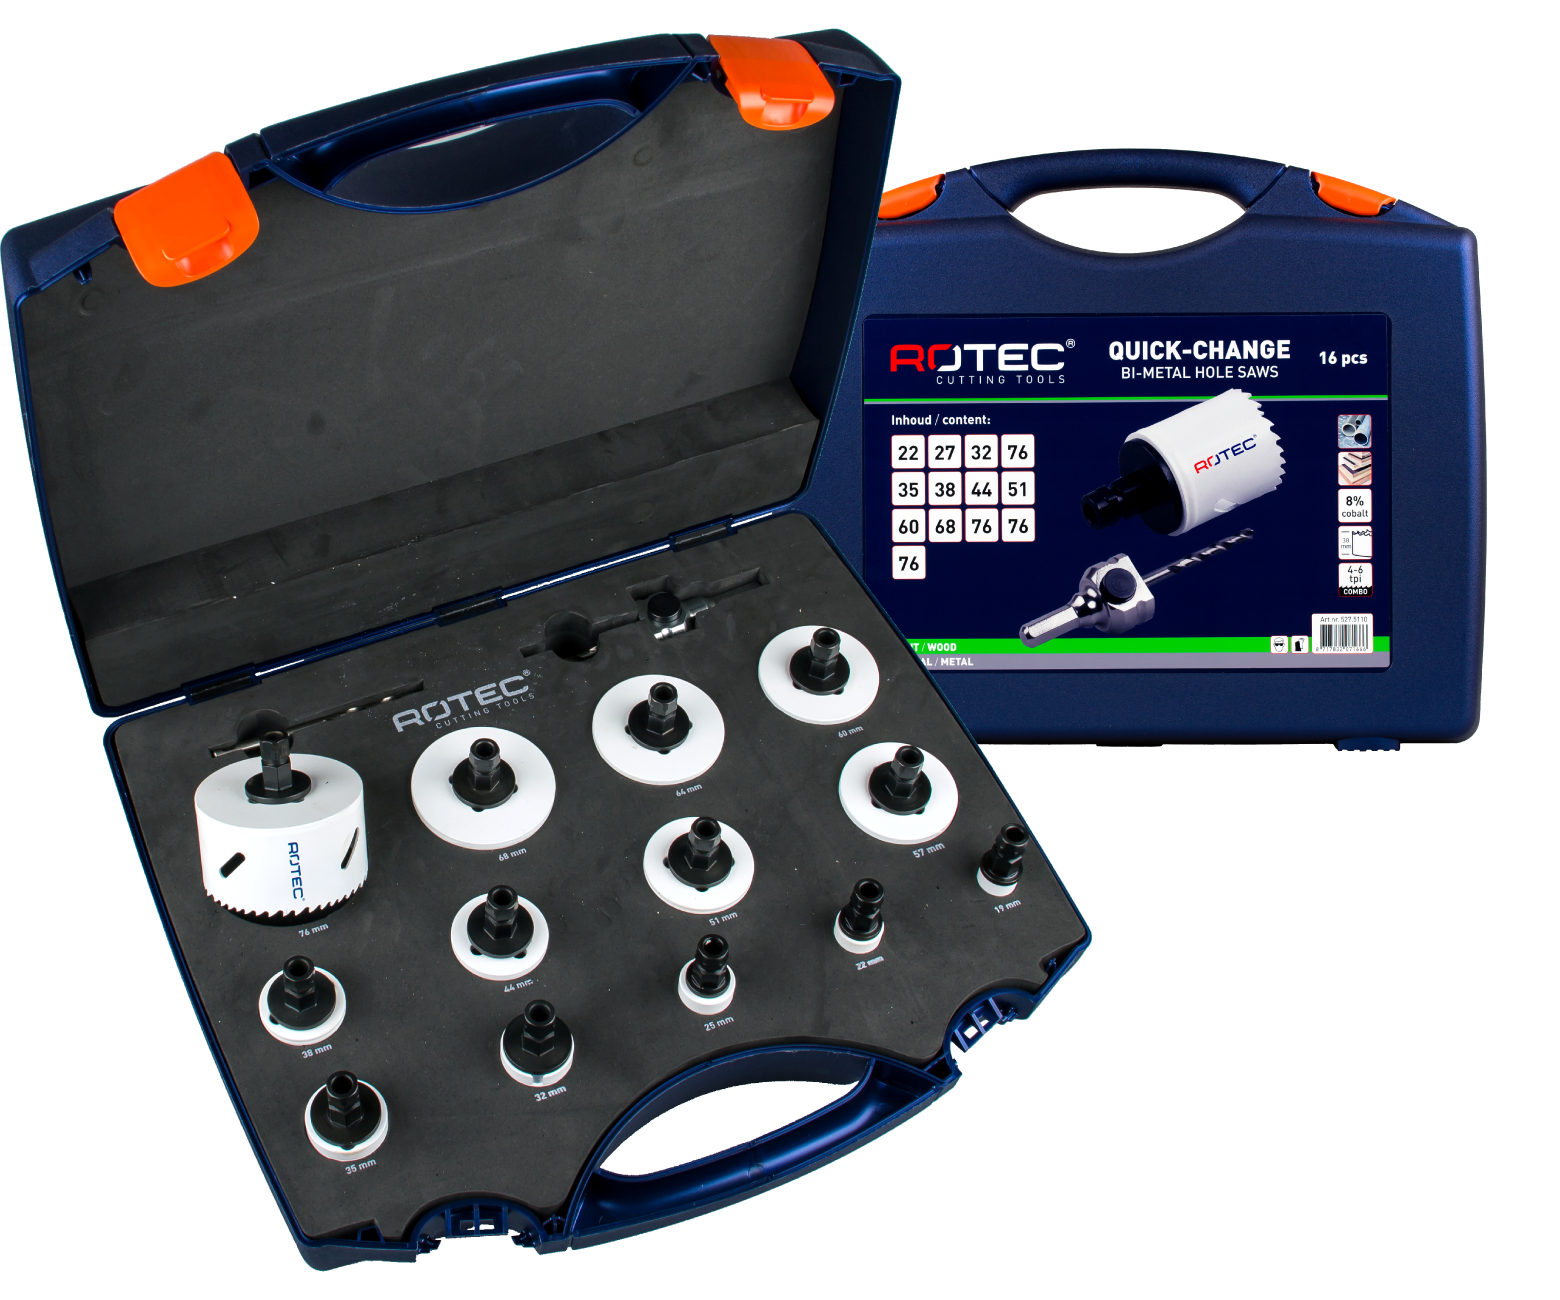 Hole saw set '527 - Allround' with Quick-Change adapters, 16 pcs